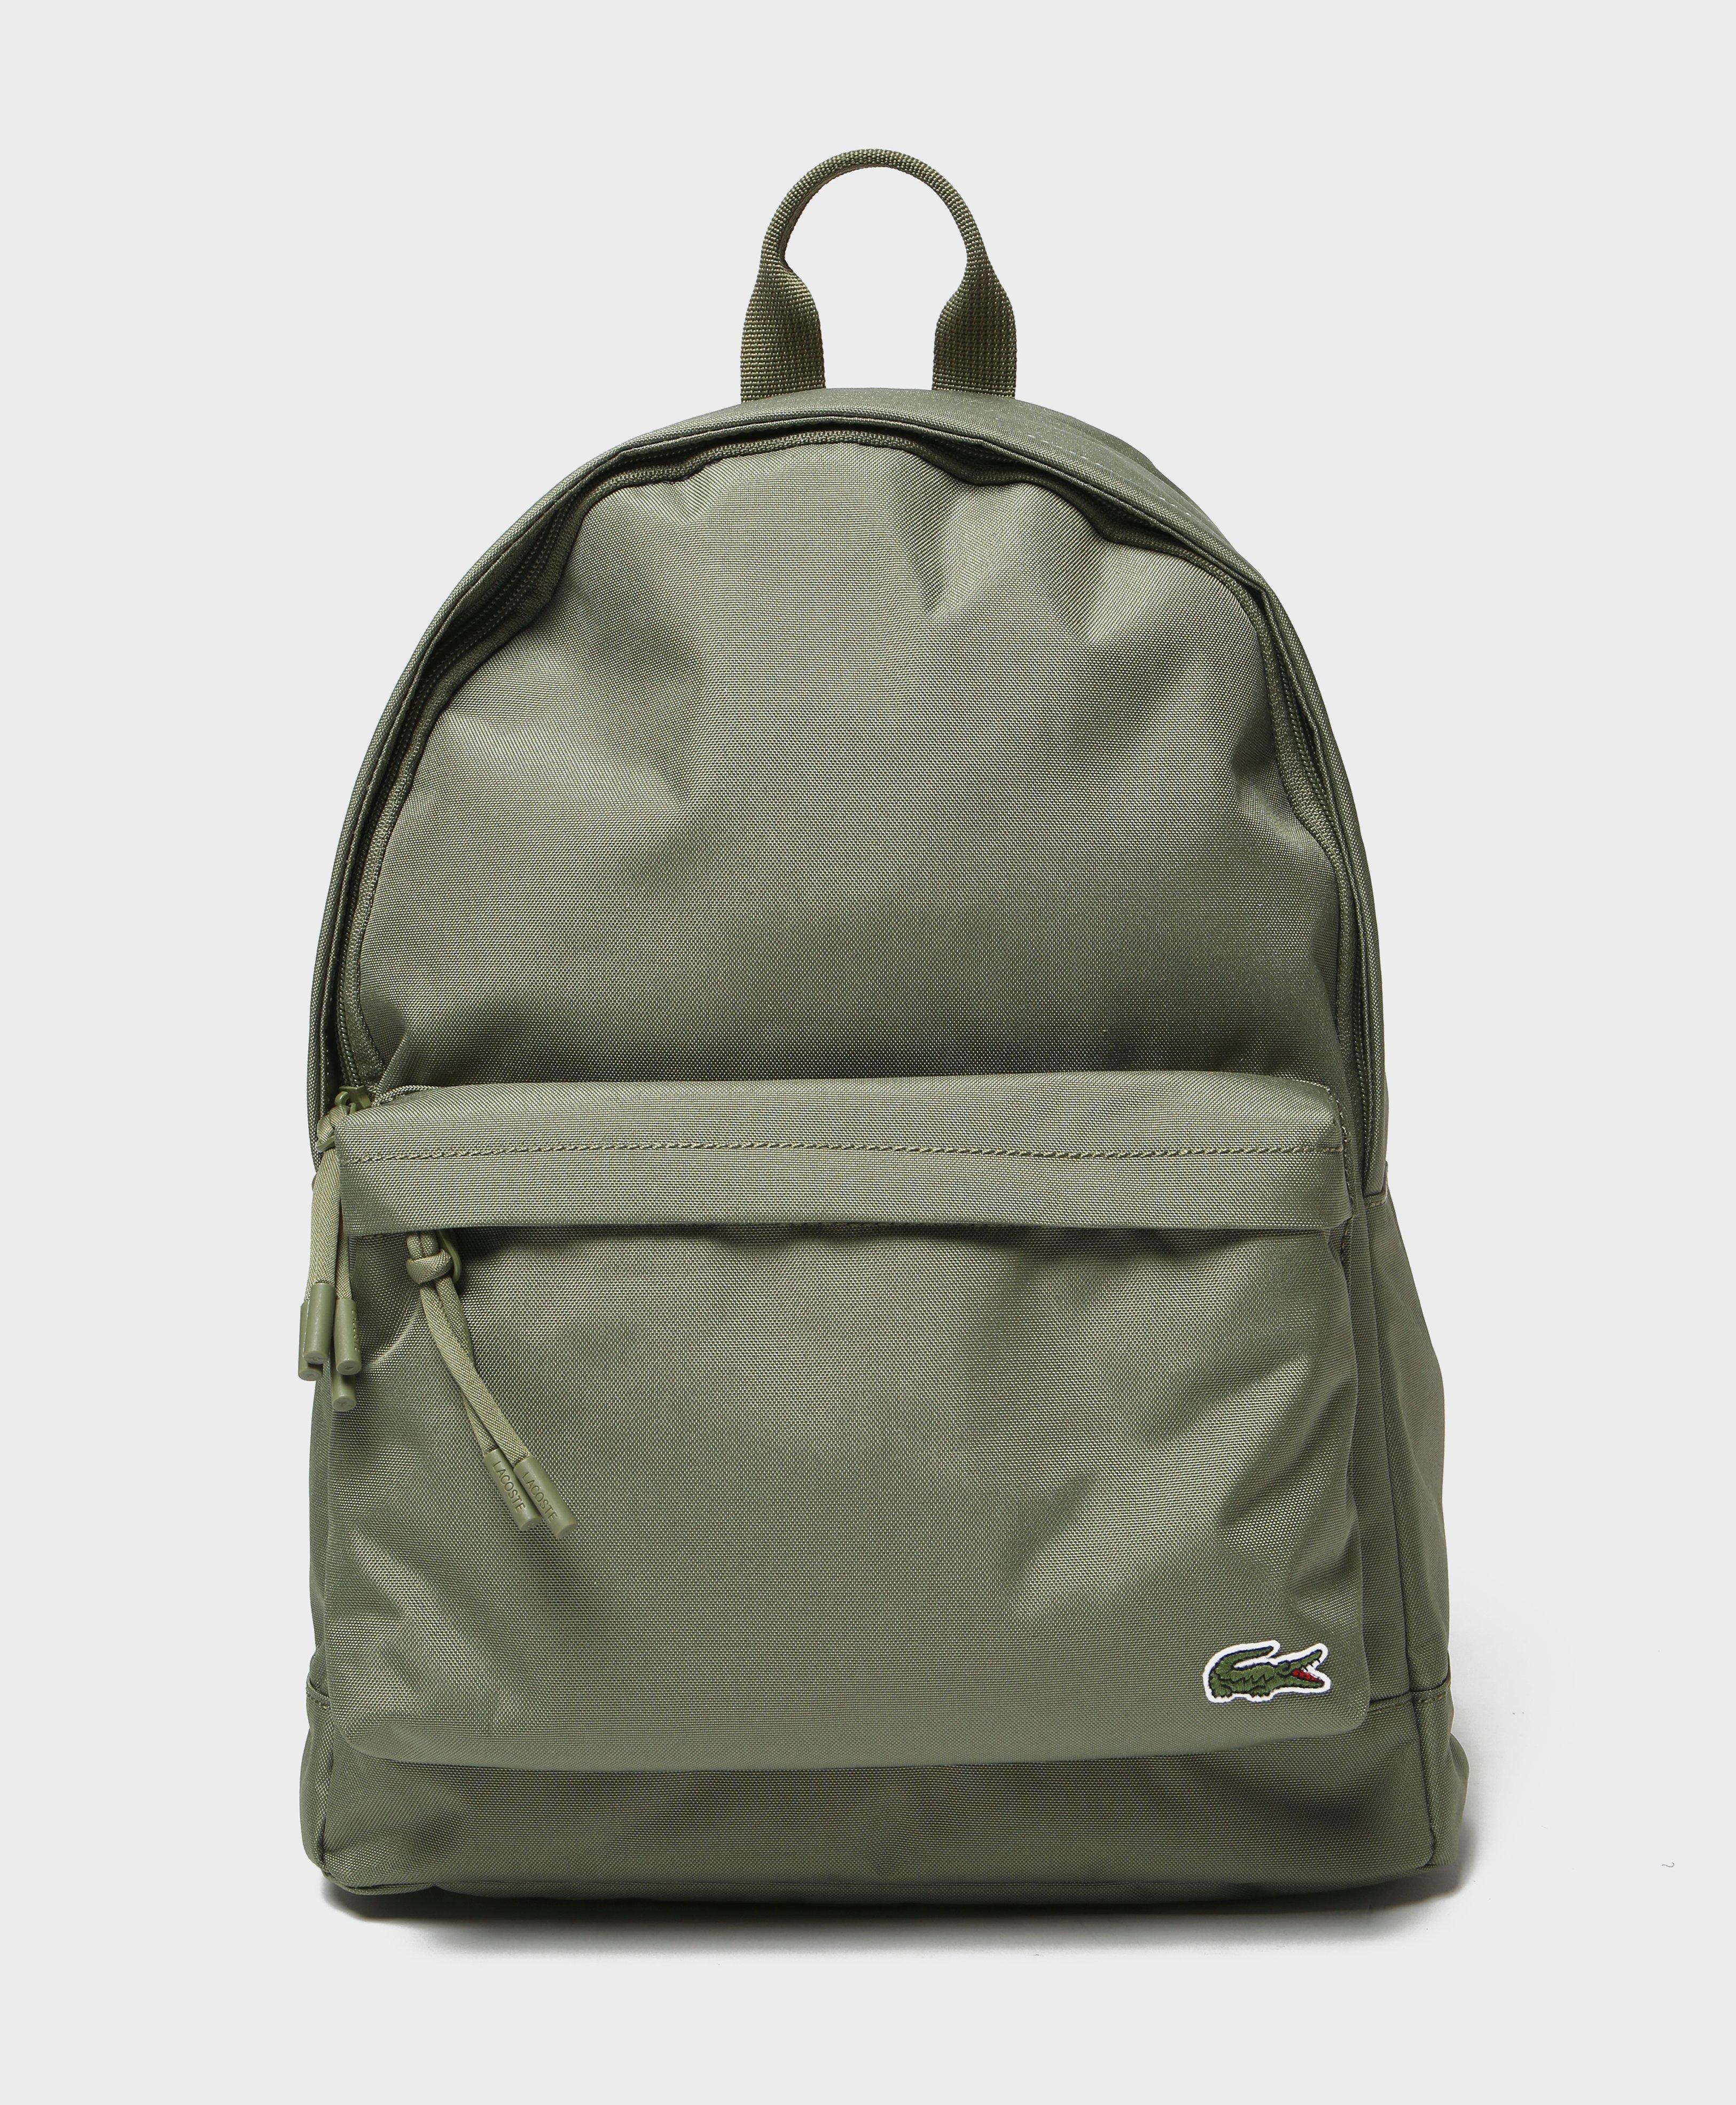 lacoste green backpack